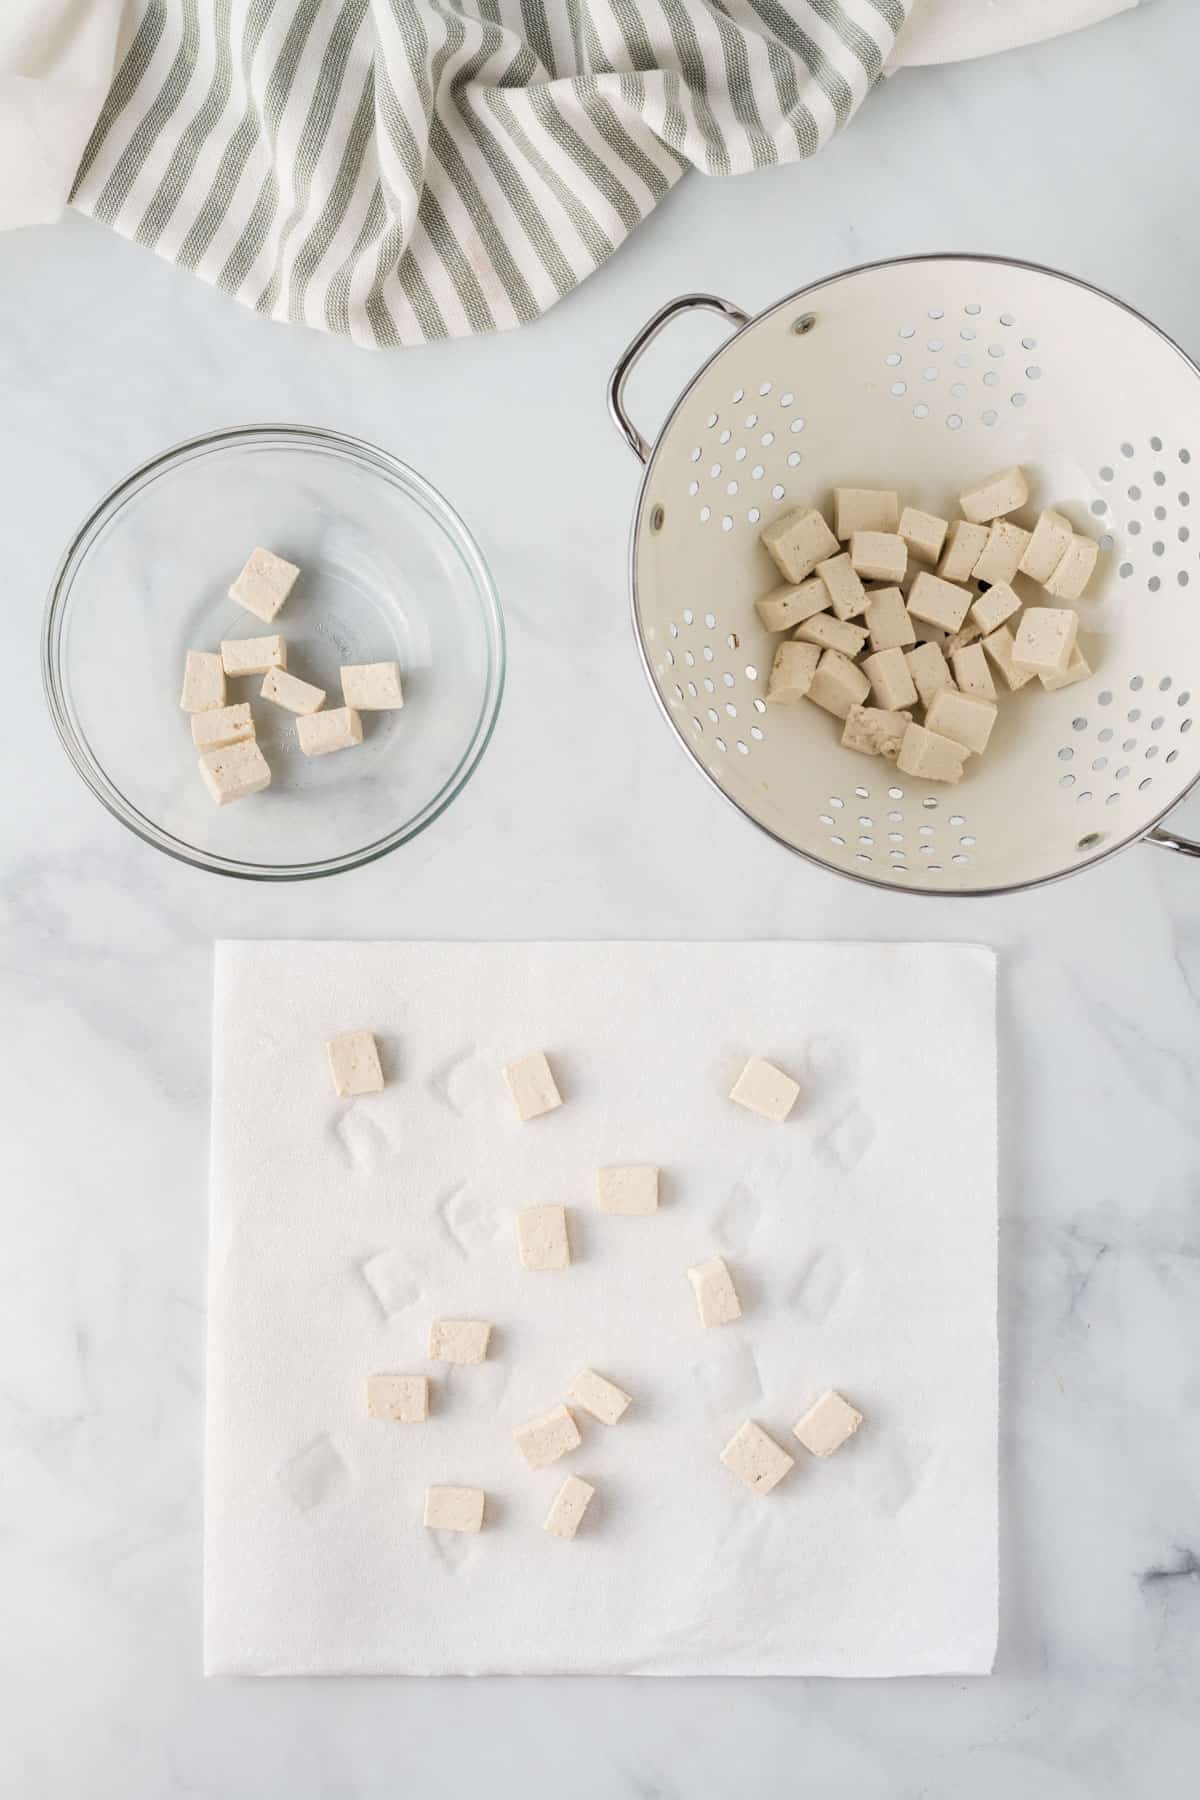 cubed tofu drying on a paper towel